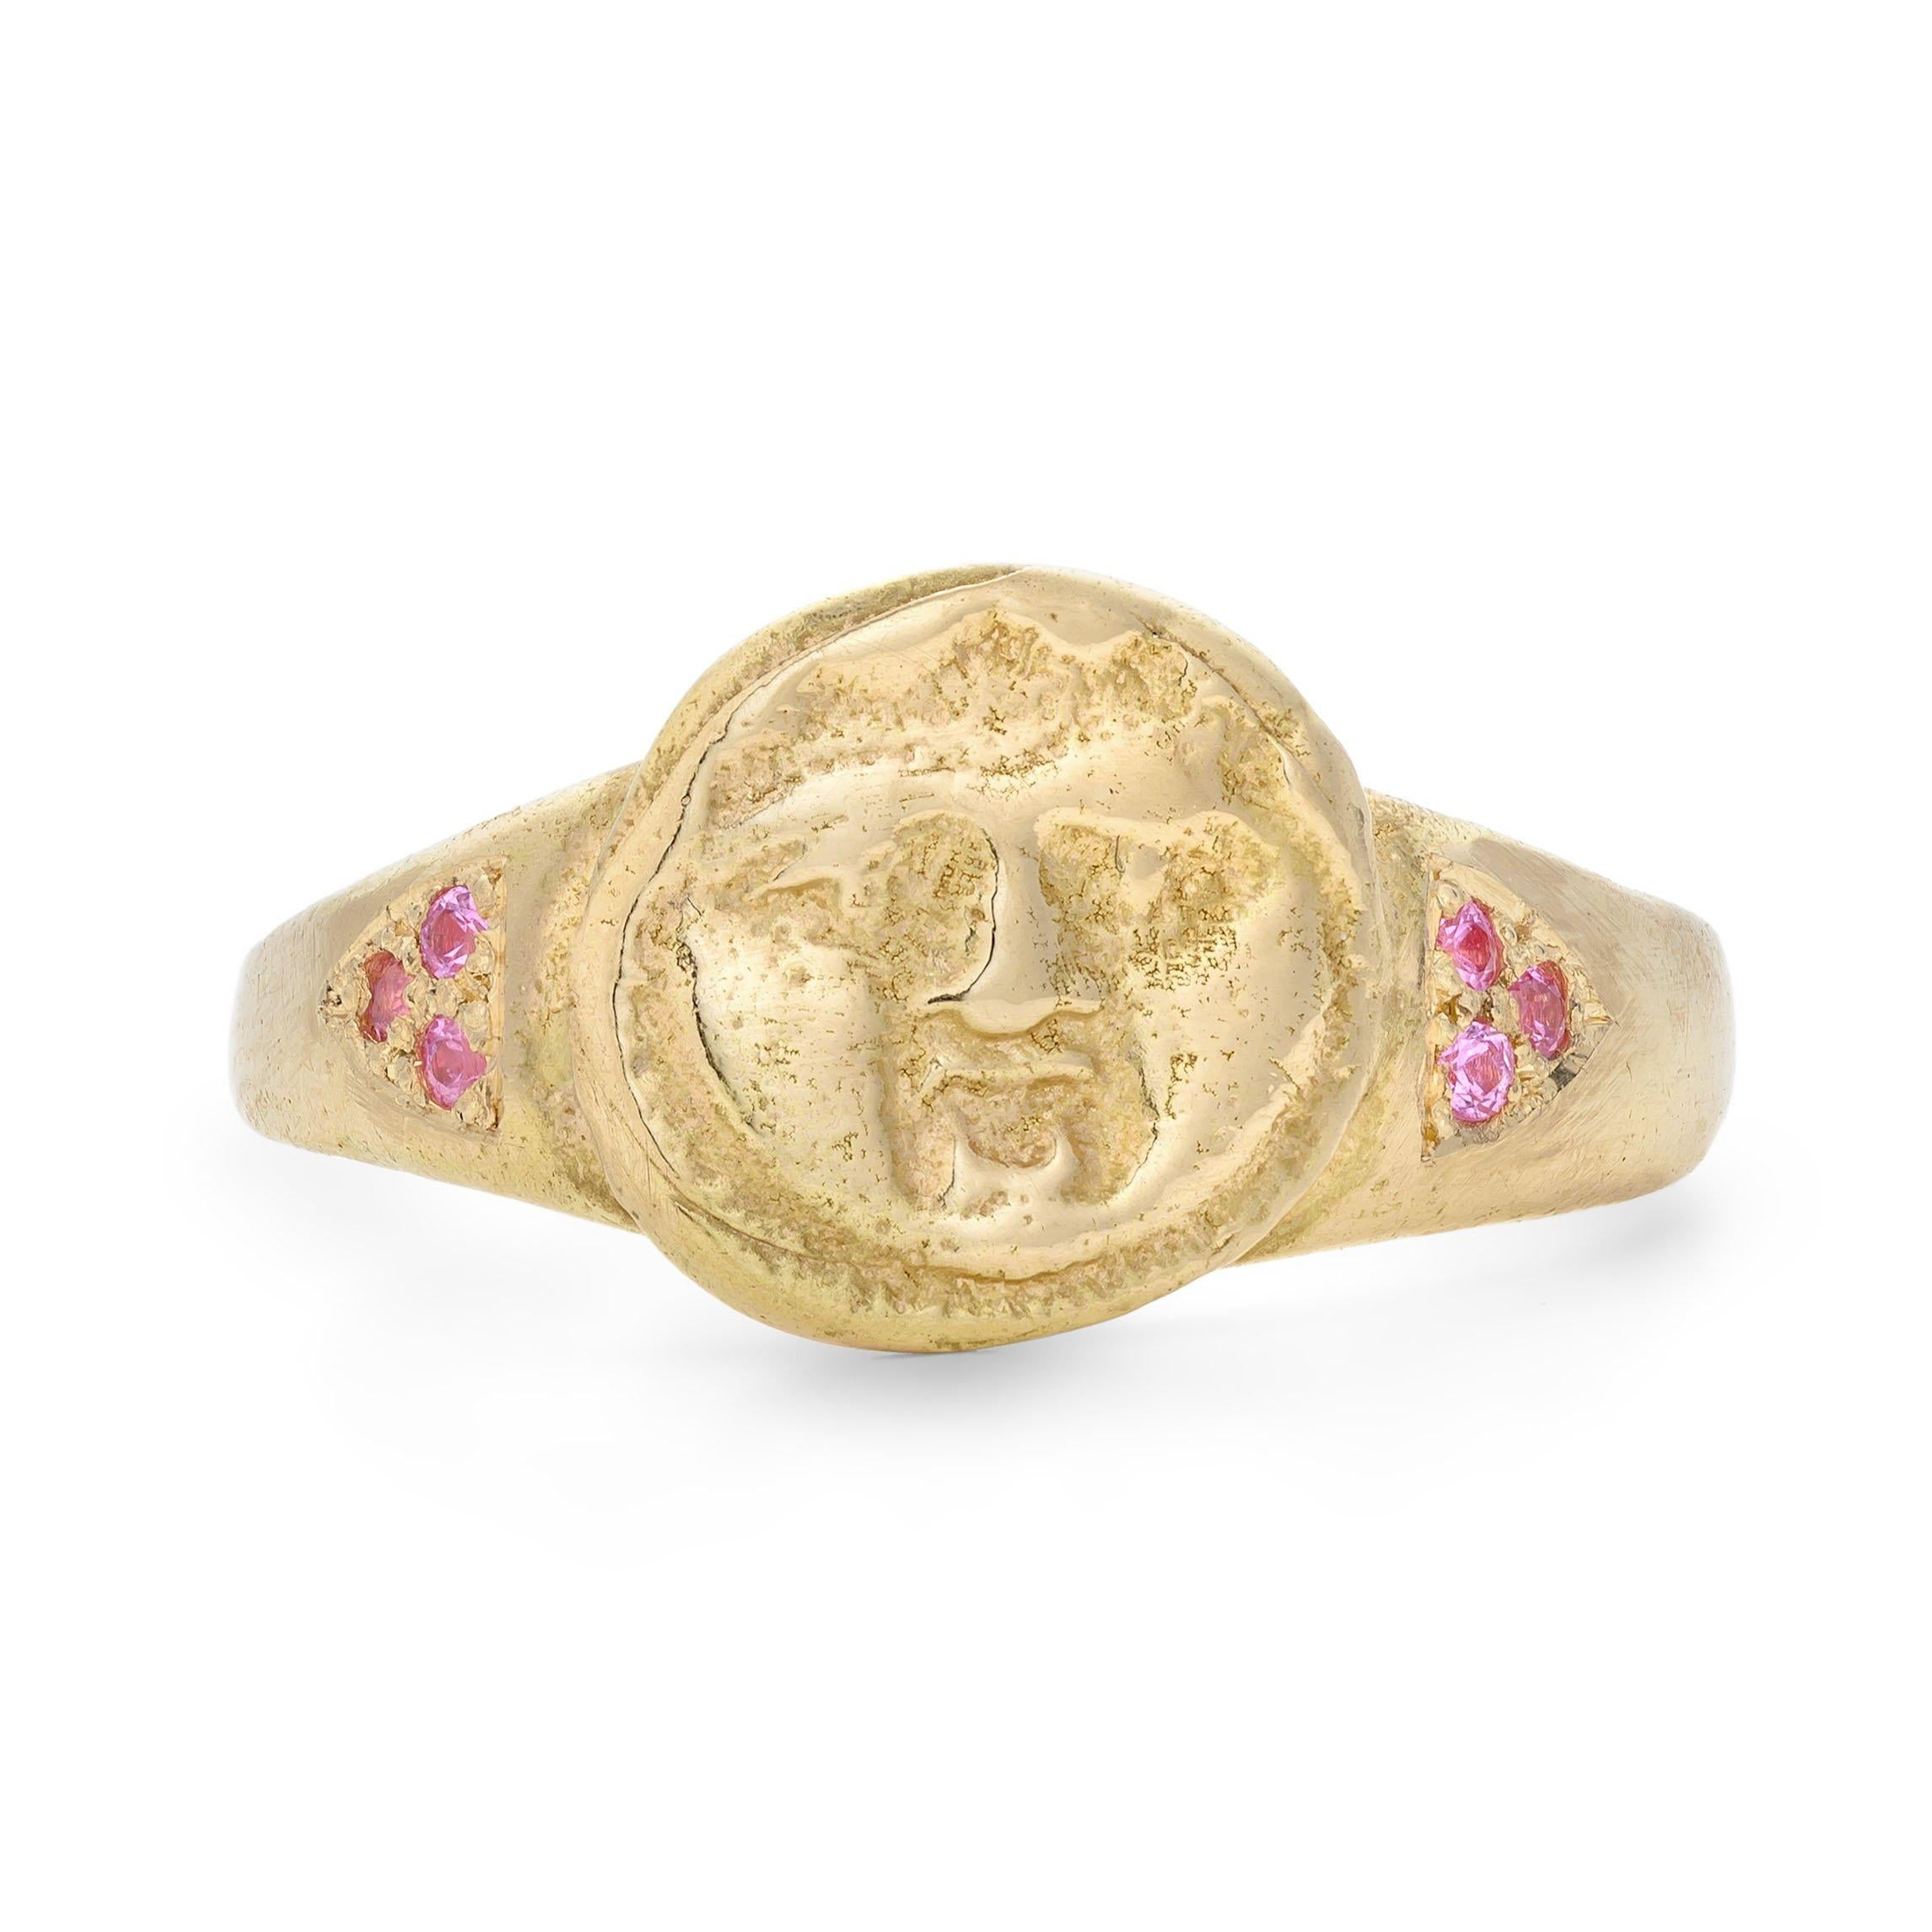 Gorgoneion Pinky Ring, 18 Karat Yellow Gold with Pink Sapphire
Handcrafted and individually cast in 18-karat gold. Rose gold also available. Olivia carves each piece from wax, making these items unique, which we believe is what gives them their